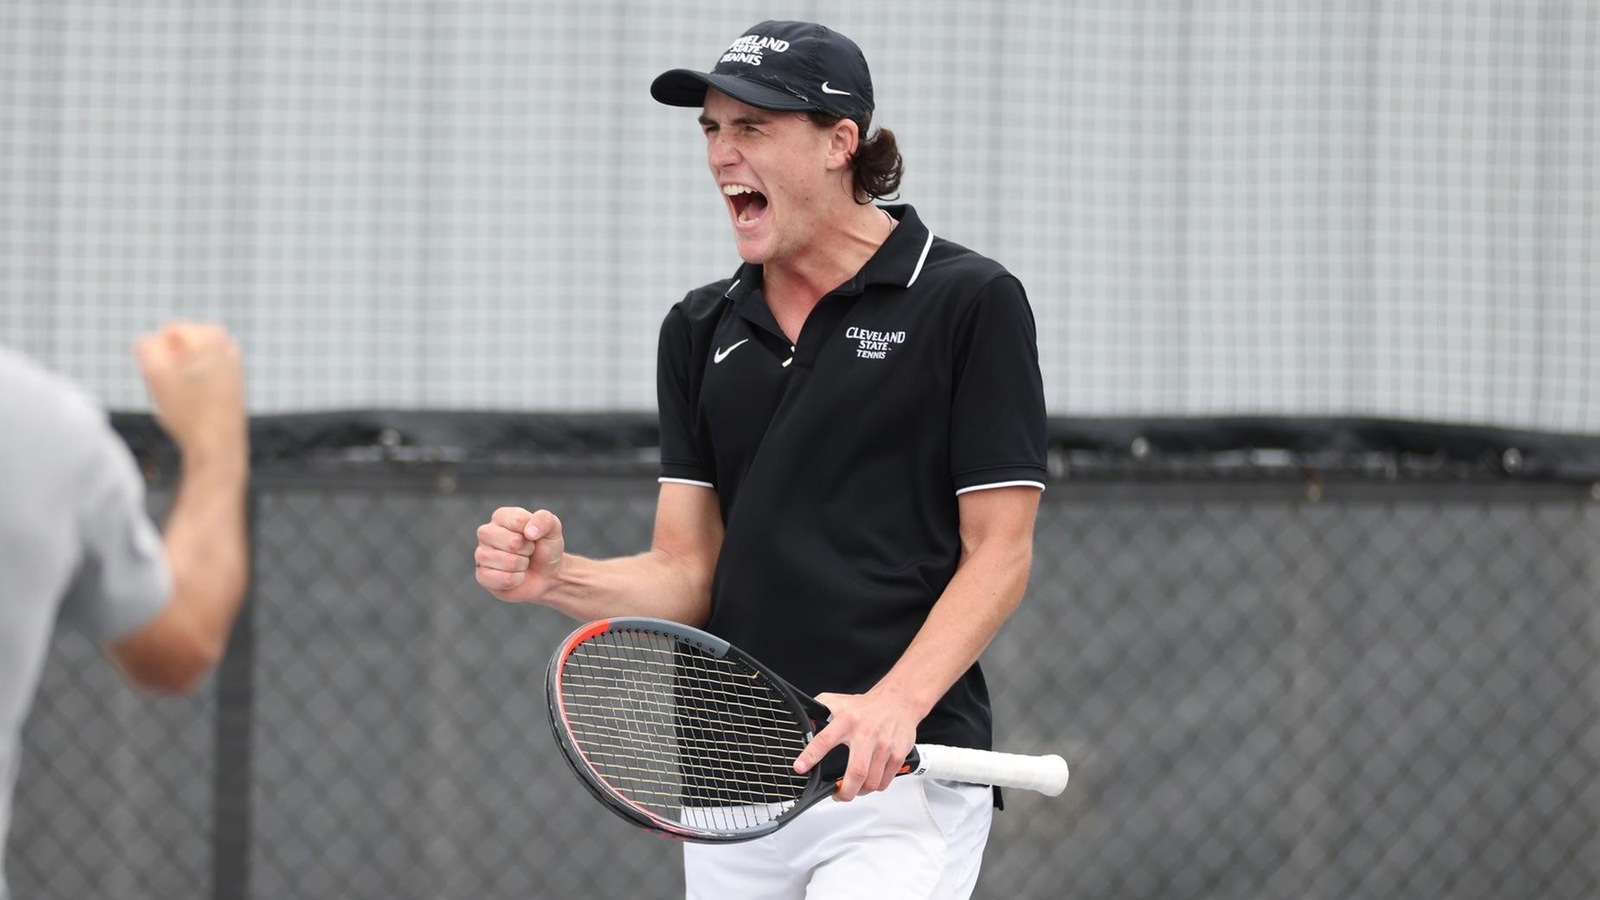 Cleveland State Men’s Tennis Advances To #HLTennis Championship With 4-3 Win Over Tennessee State